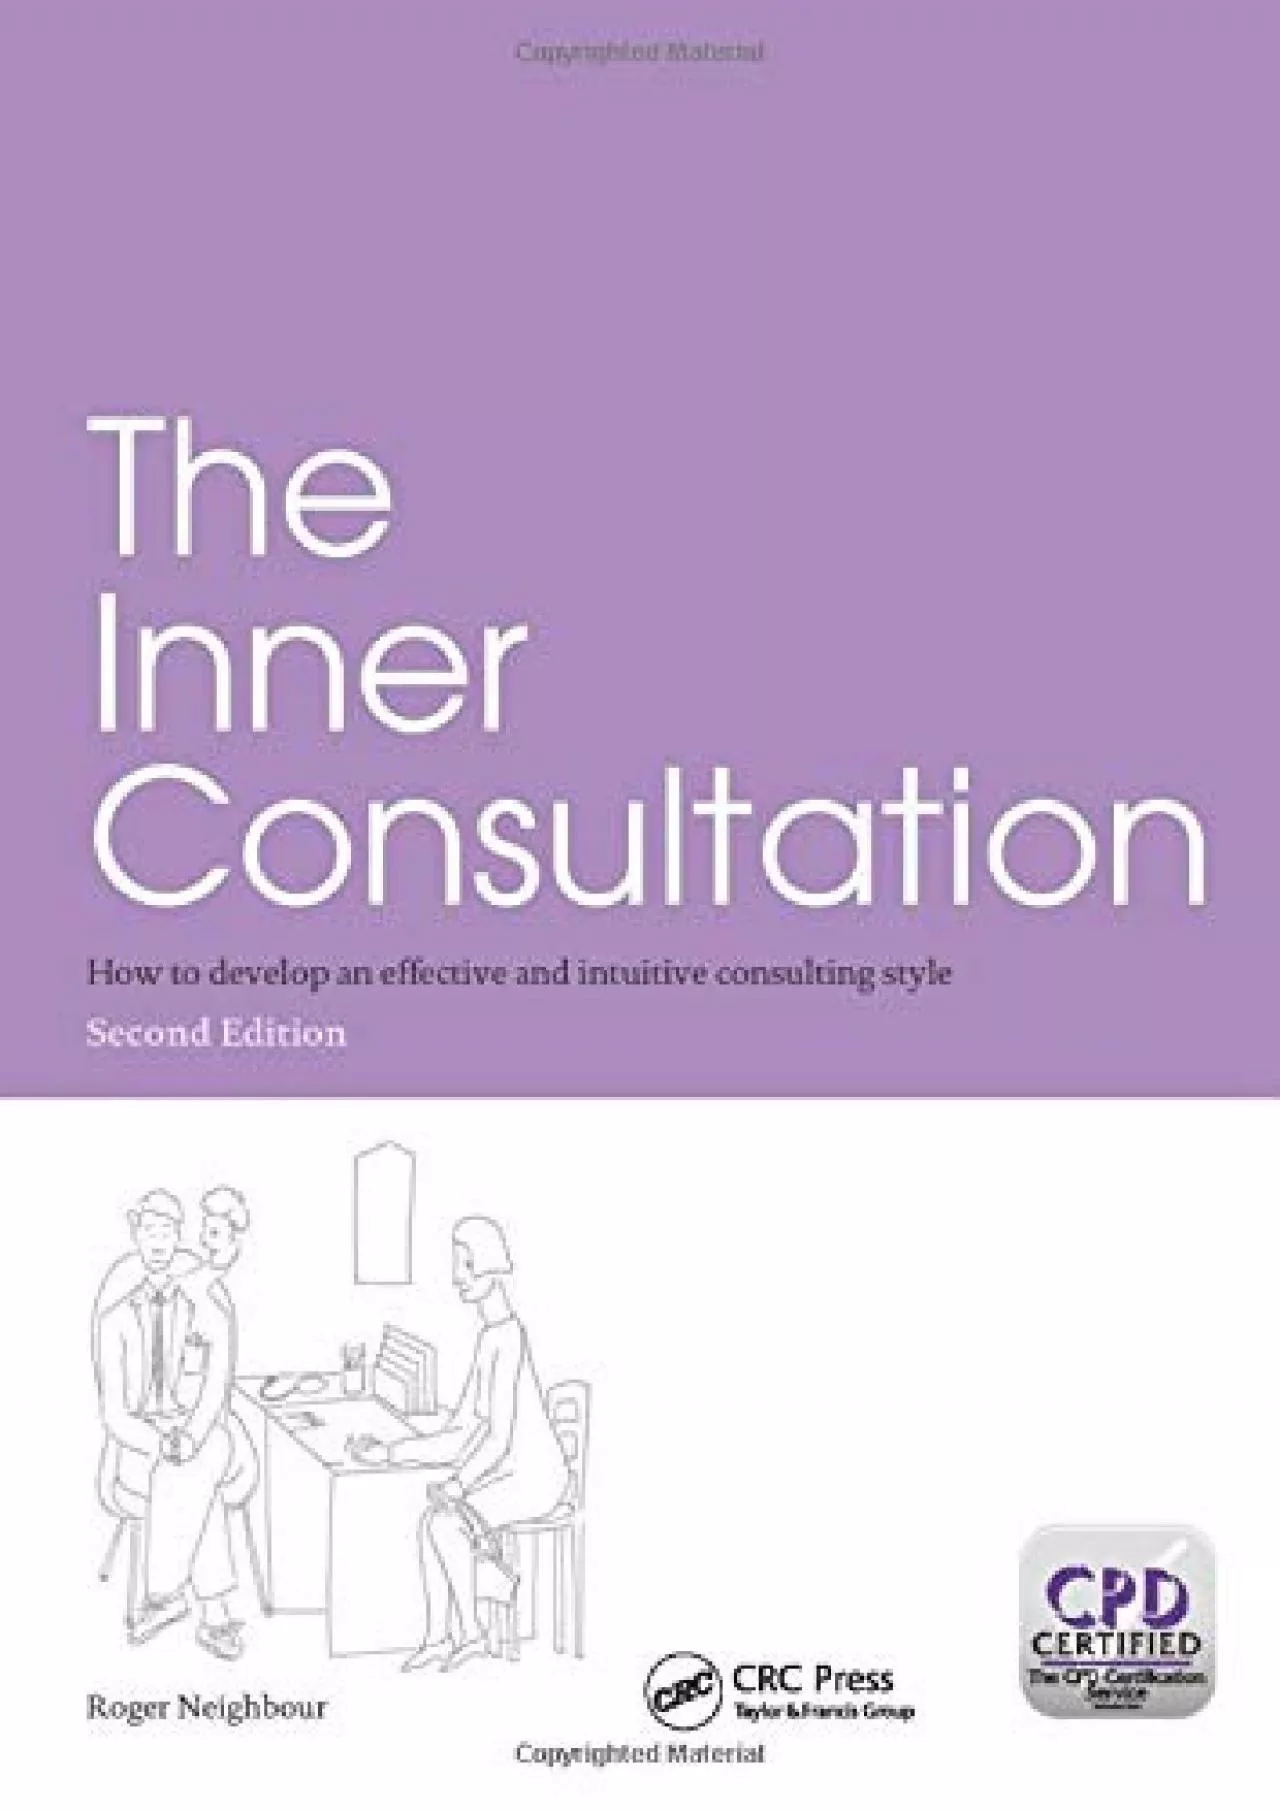 (EBOOK)-The Inner Consultation: How to Develop an Effective and Intuitive Consulting Style,